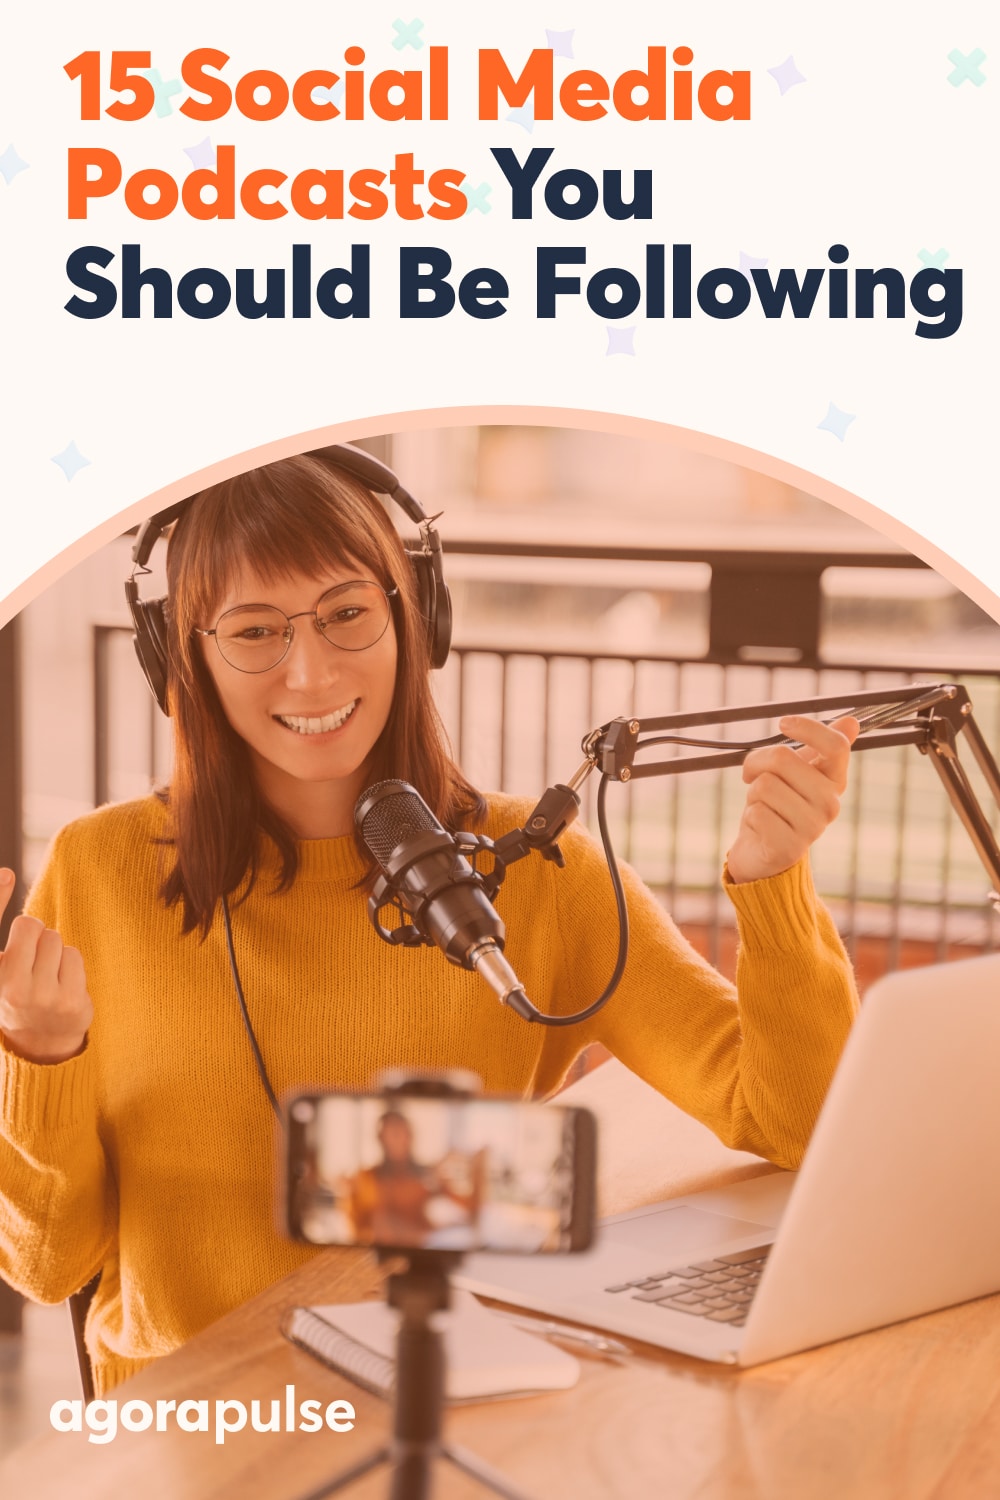 15 Social Media Podcasts You Should Be Following